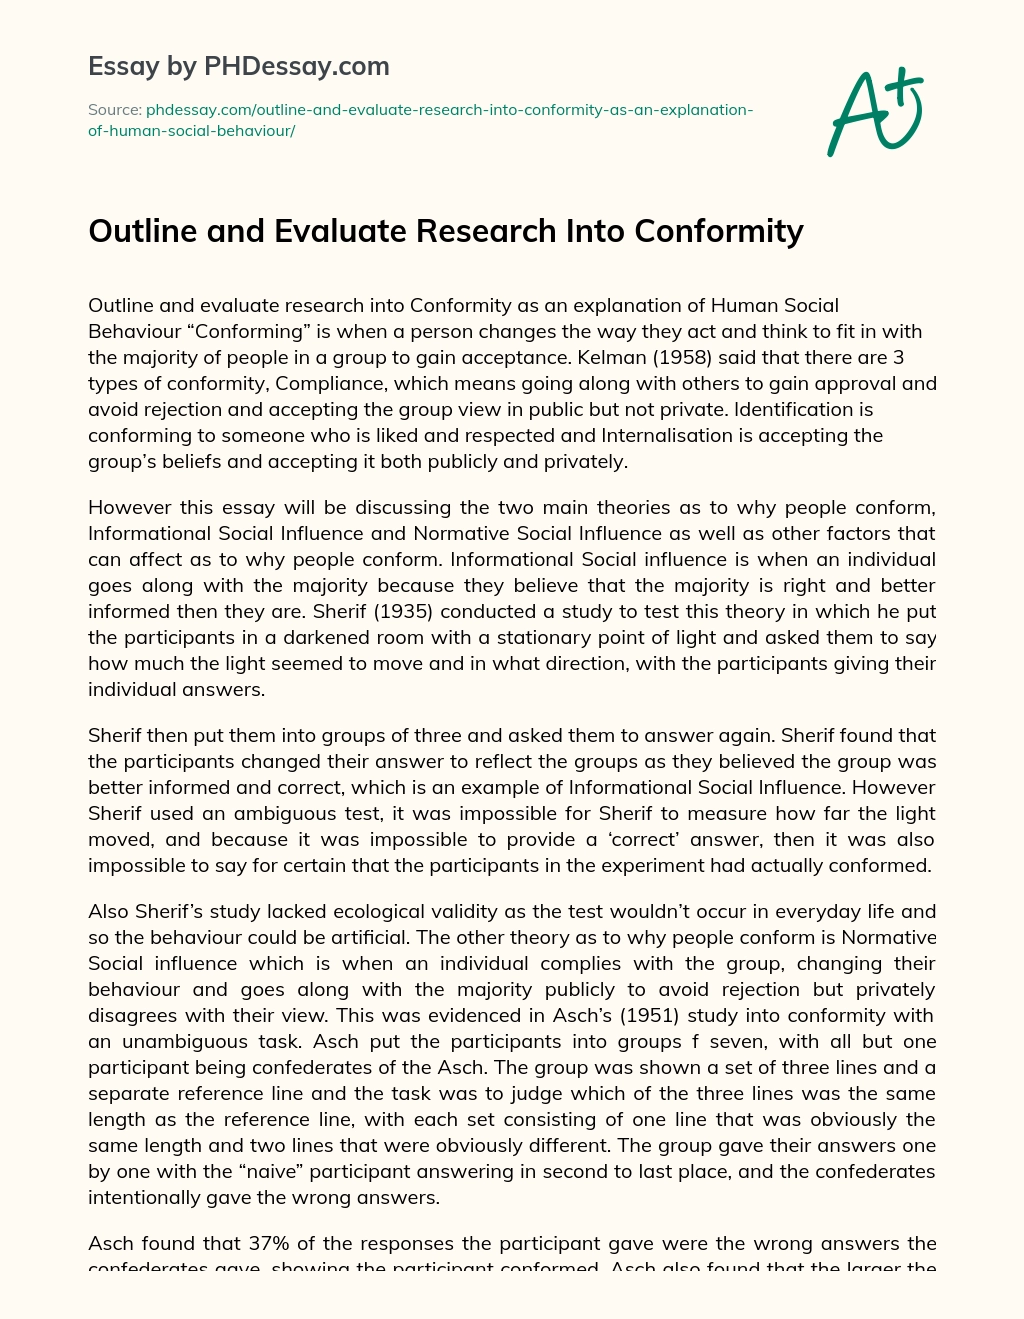 Outline and Evaluate Research Into Conformity essay